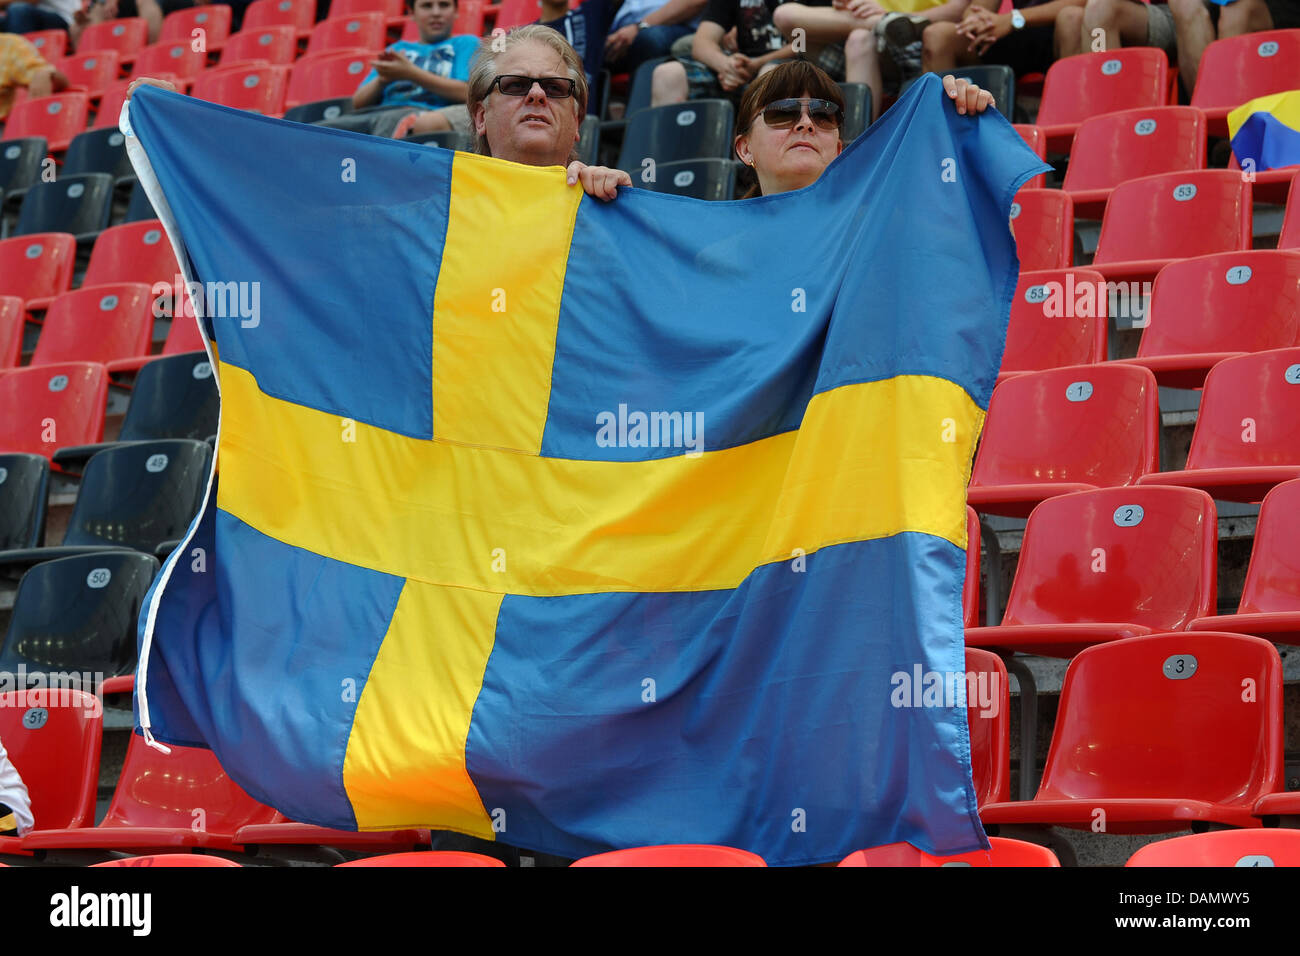 A Sweden fan raises the Swedish national flag during the preliminary round of the FIFA Women's soccer world cup match between Colombia and Sweden in Leverkusen, Germany, 29 June 2011. Photo: Revierfoto Stock Photo